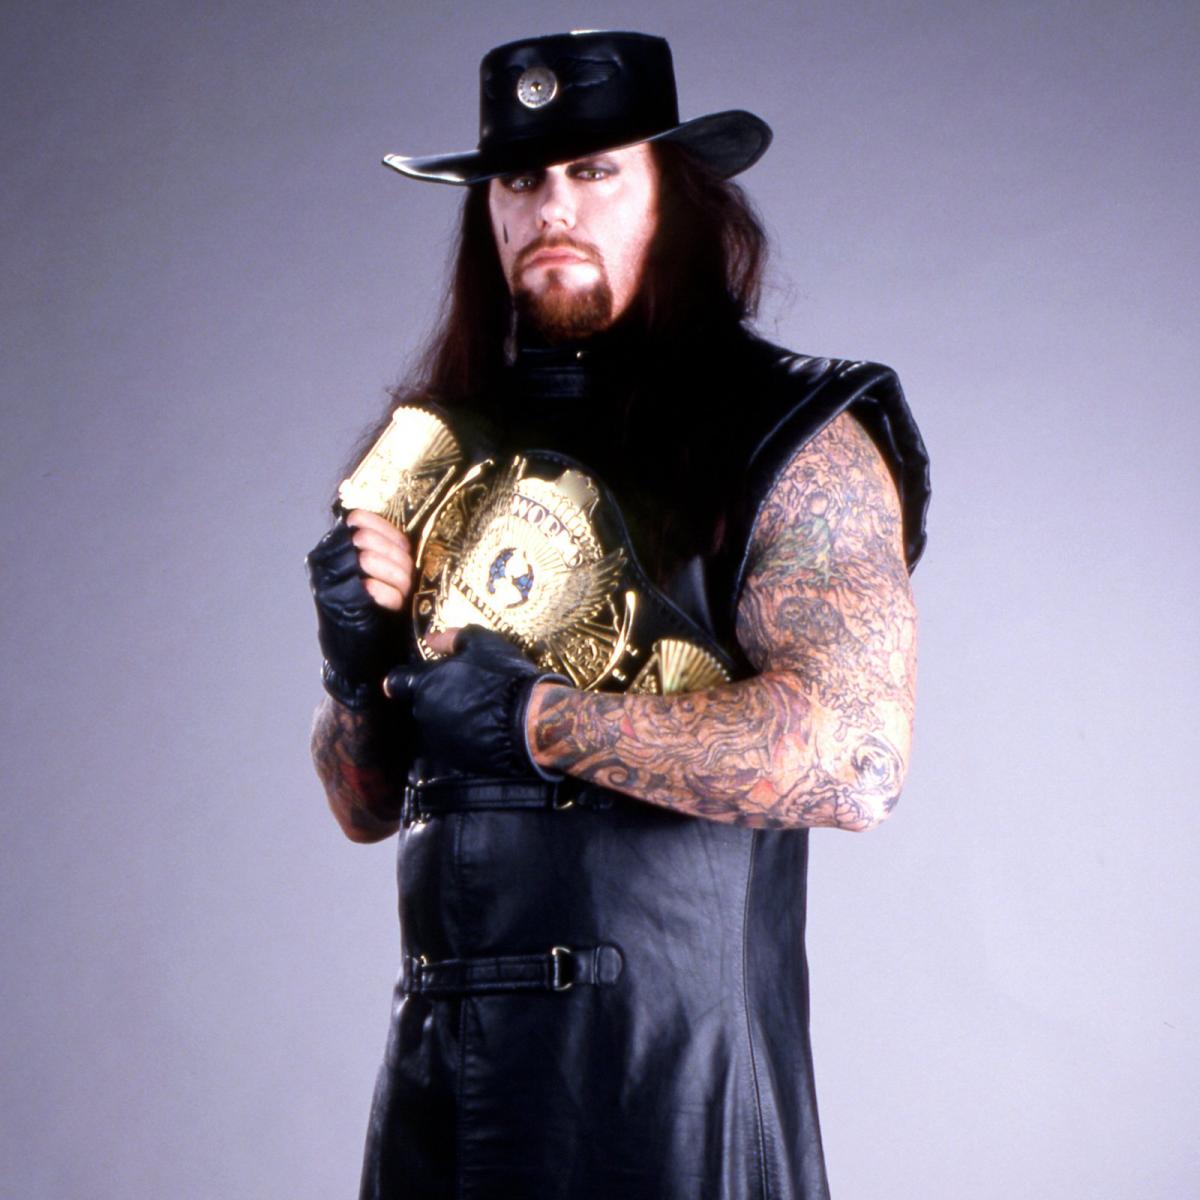 Looking Back At 29 Years Of Undertaker's WWE Evolution